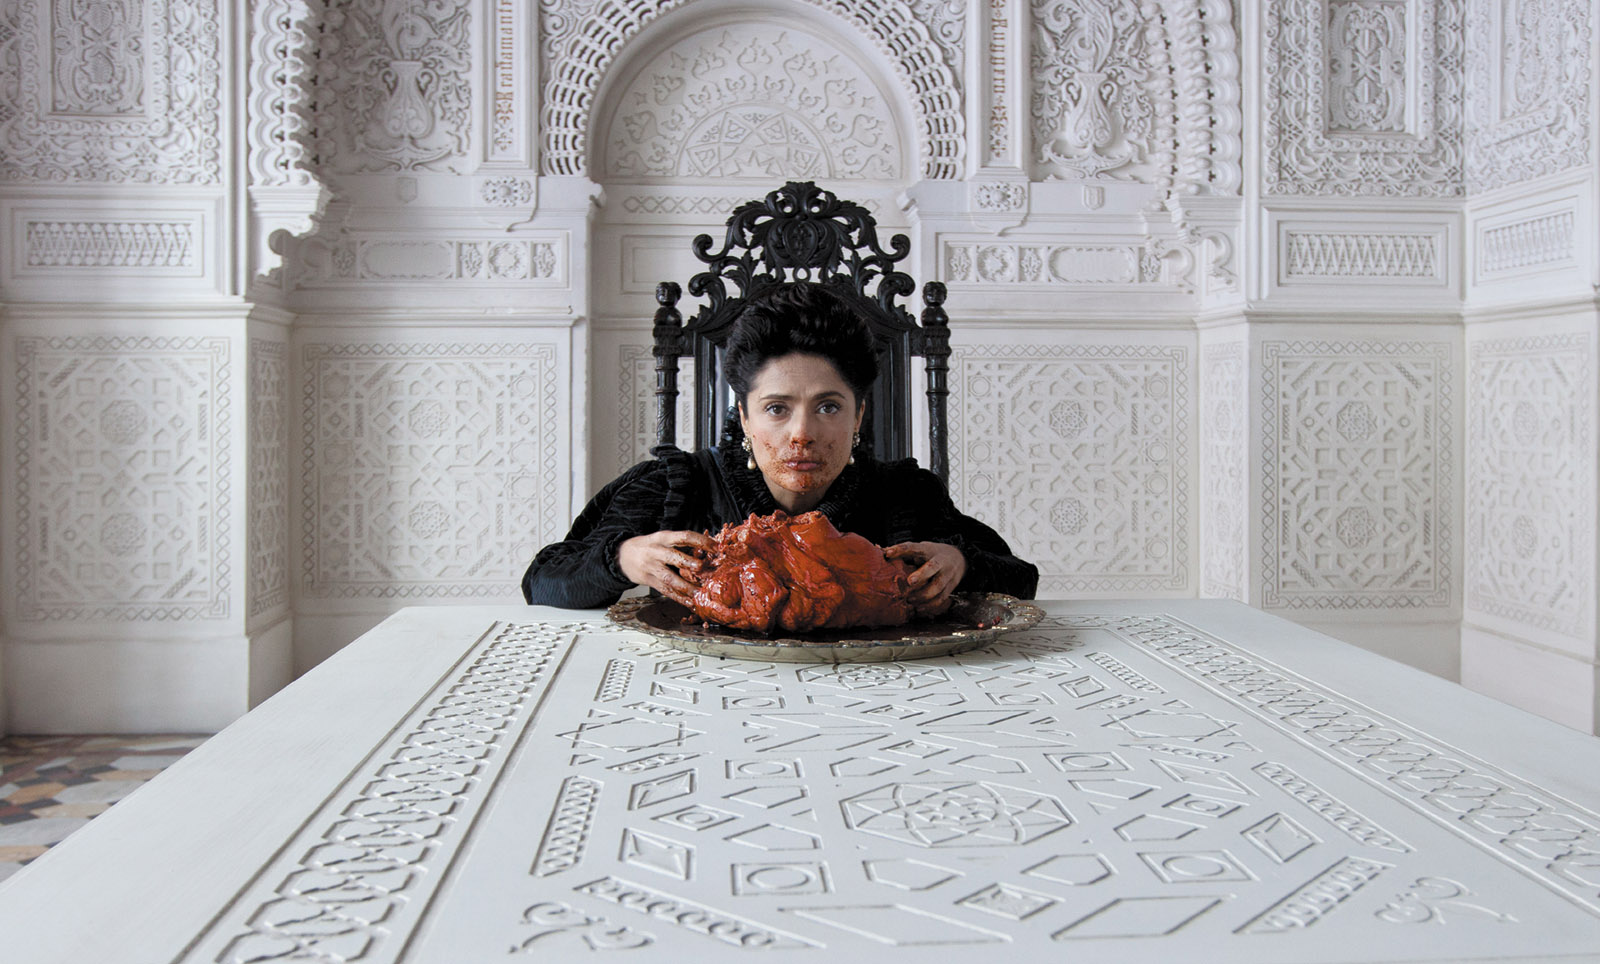 Salma Hayek as a queen eating the heart of a sea dragon in Matteo Garrone’s film Tale of Tales (2015), adapted from a set of stories by Giambattista Basile